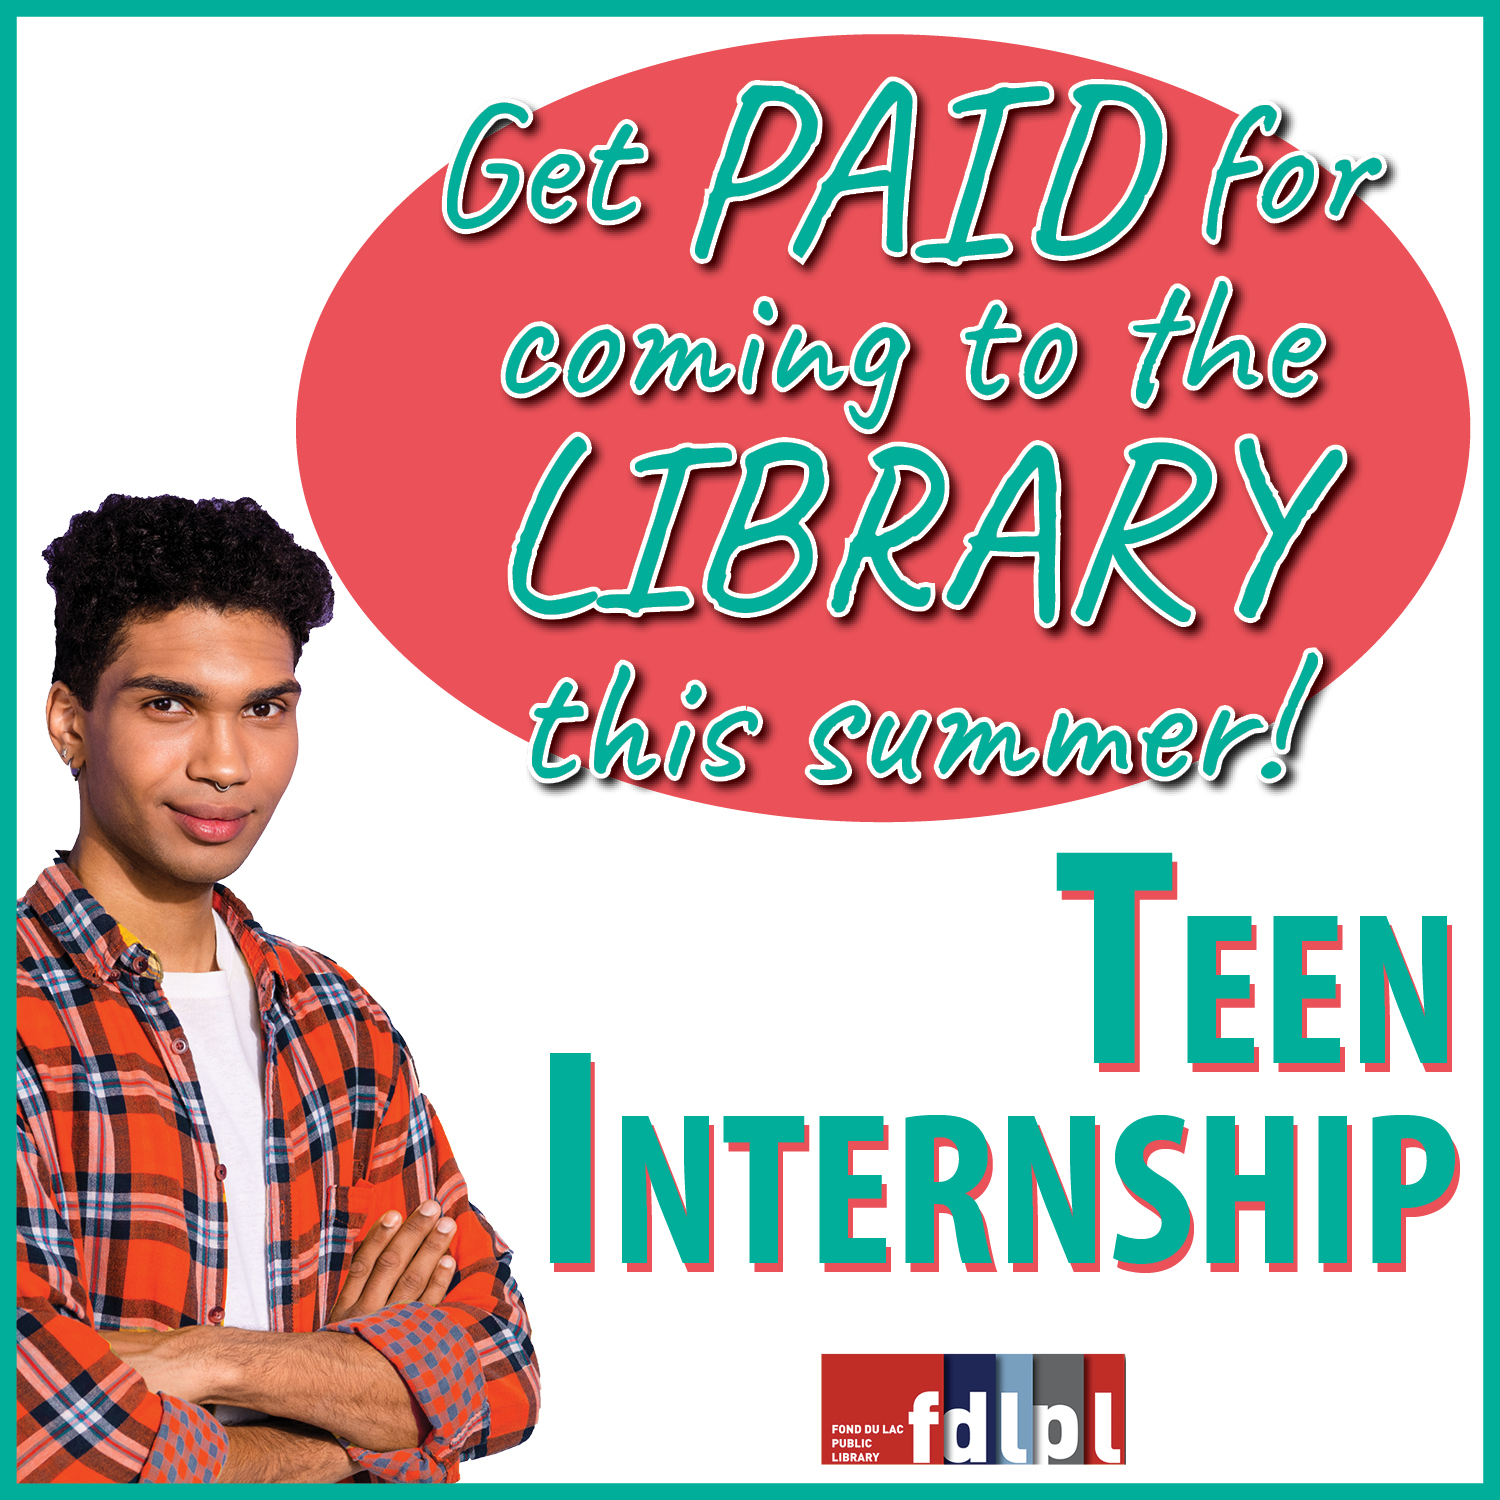 Teen intern sought at Fond du Lac Public Library for summer